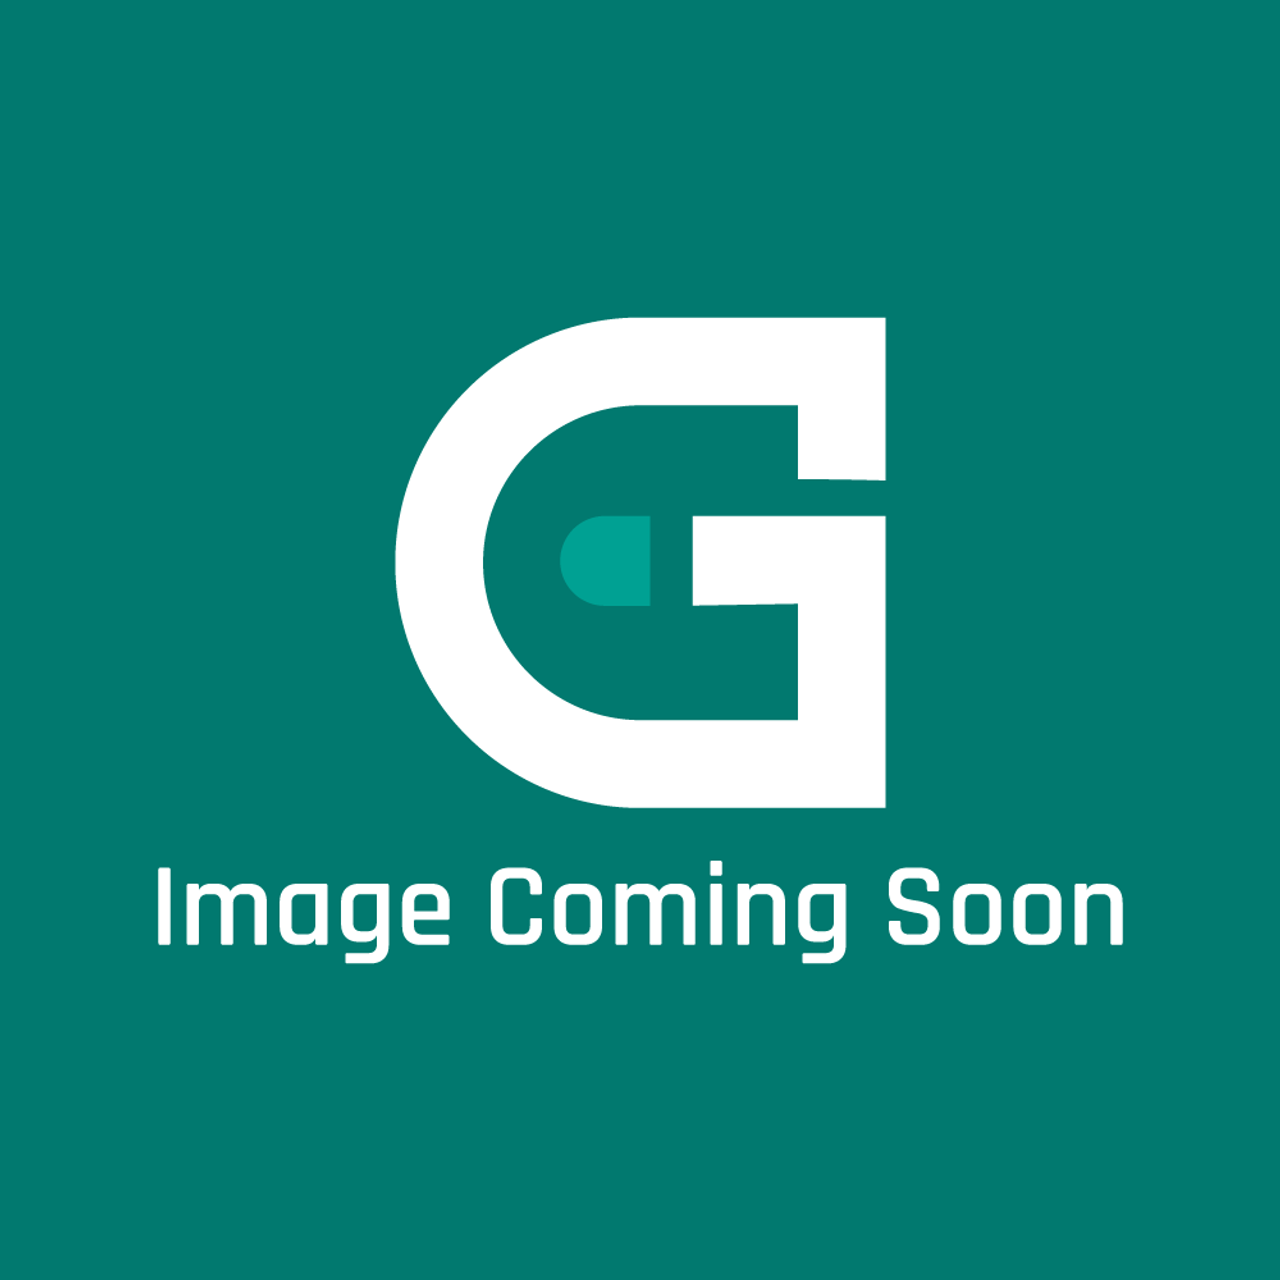 AGA Marvel FS4M997653 - T00003Axx-Erin Glass - Image Coming Soon!